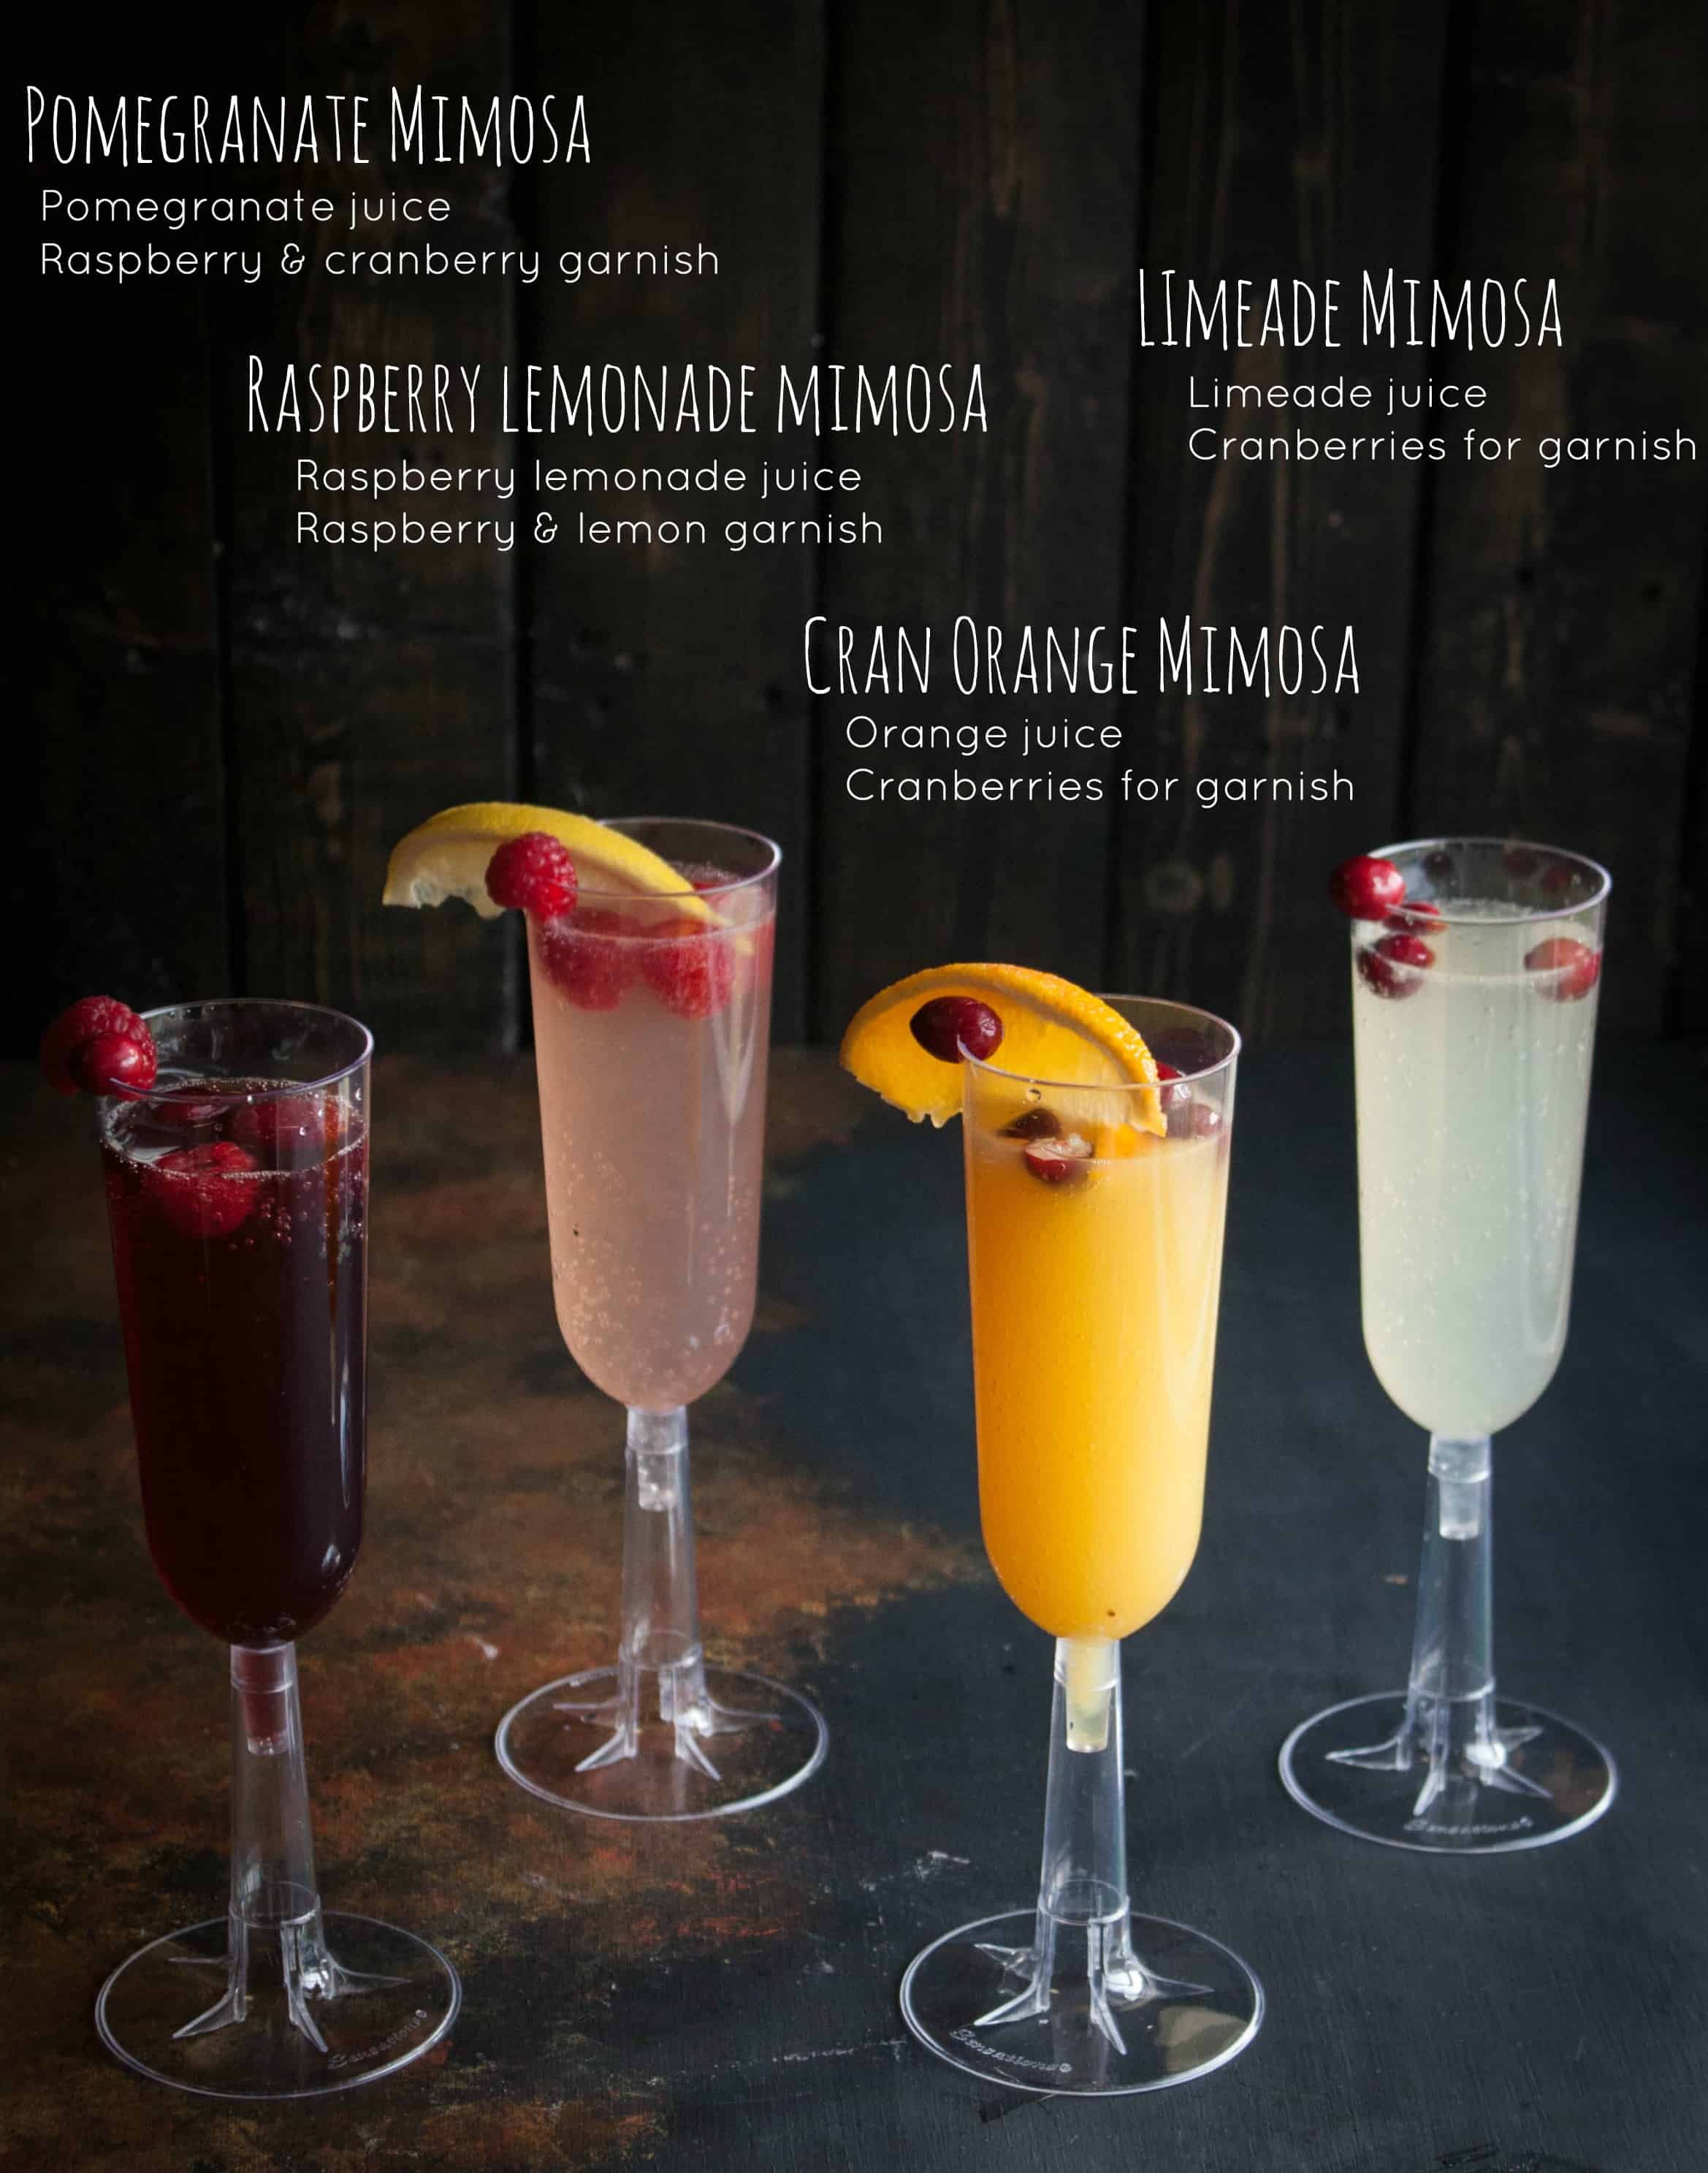 4 Different types of mimosas for a mimosa bar